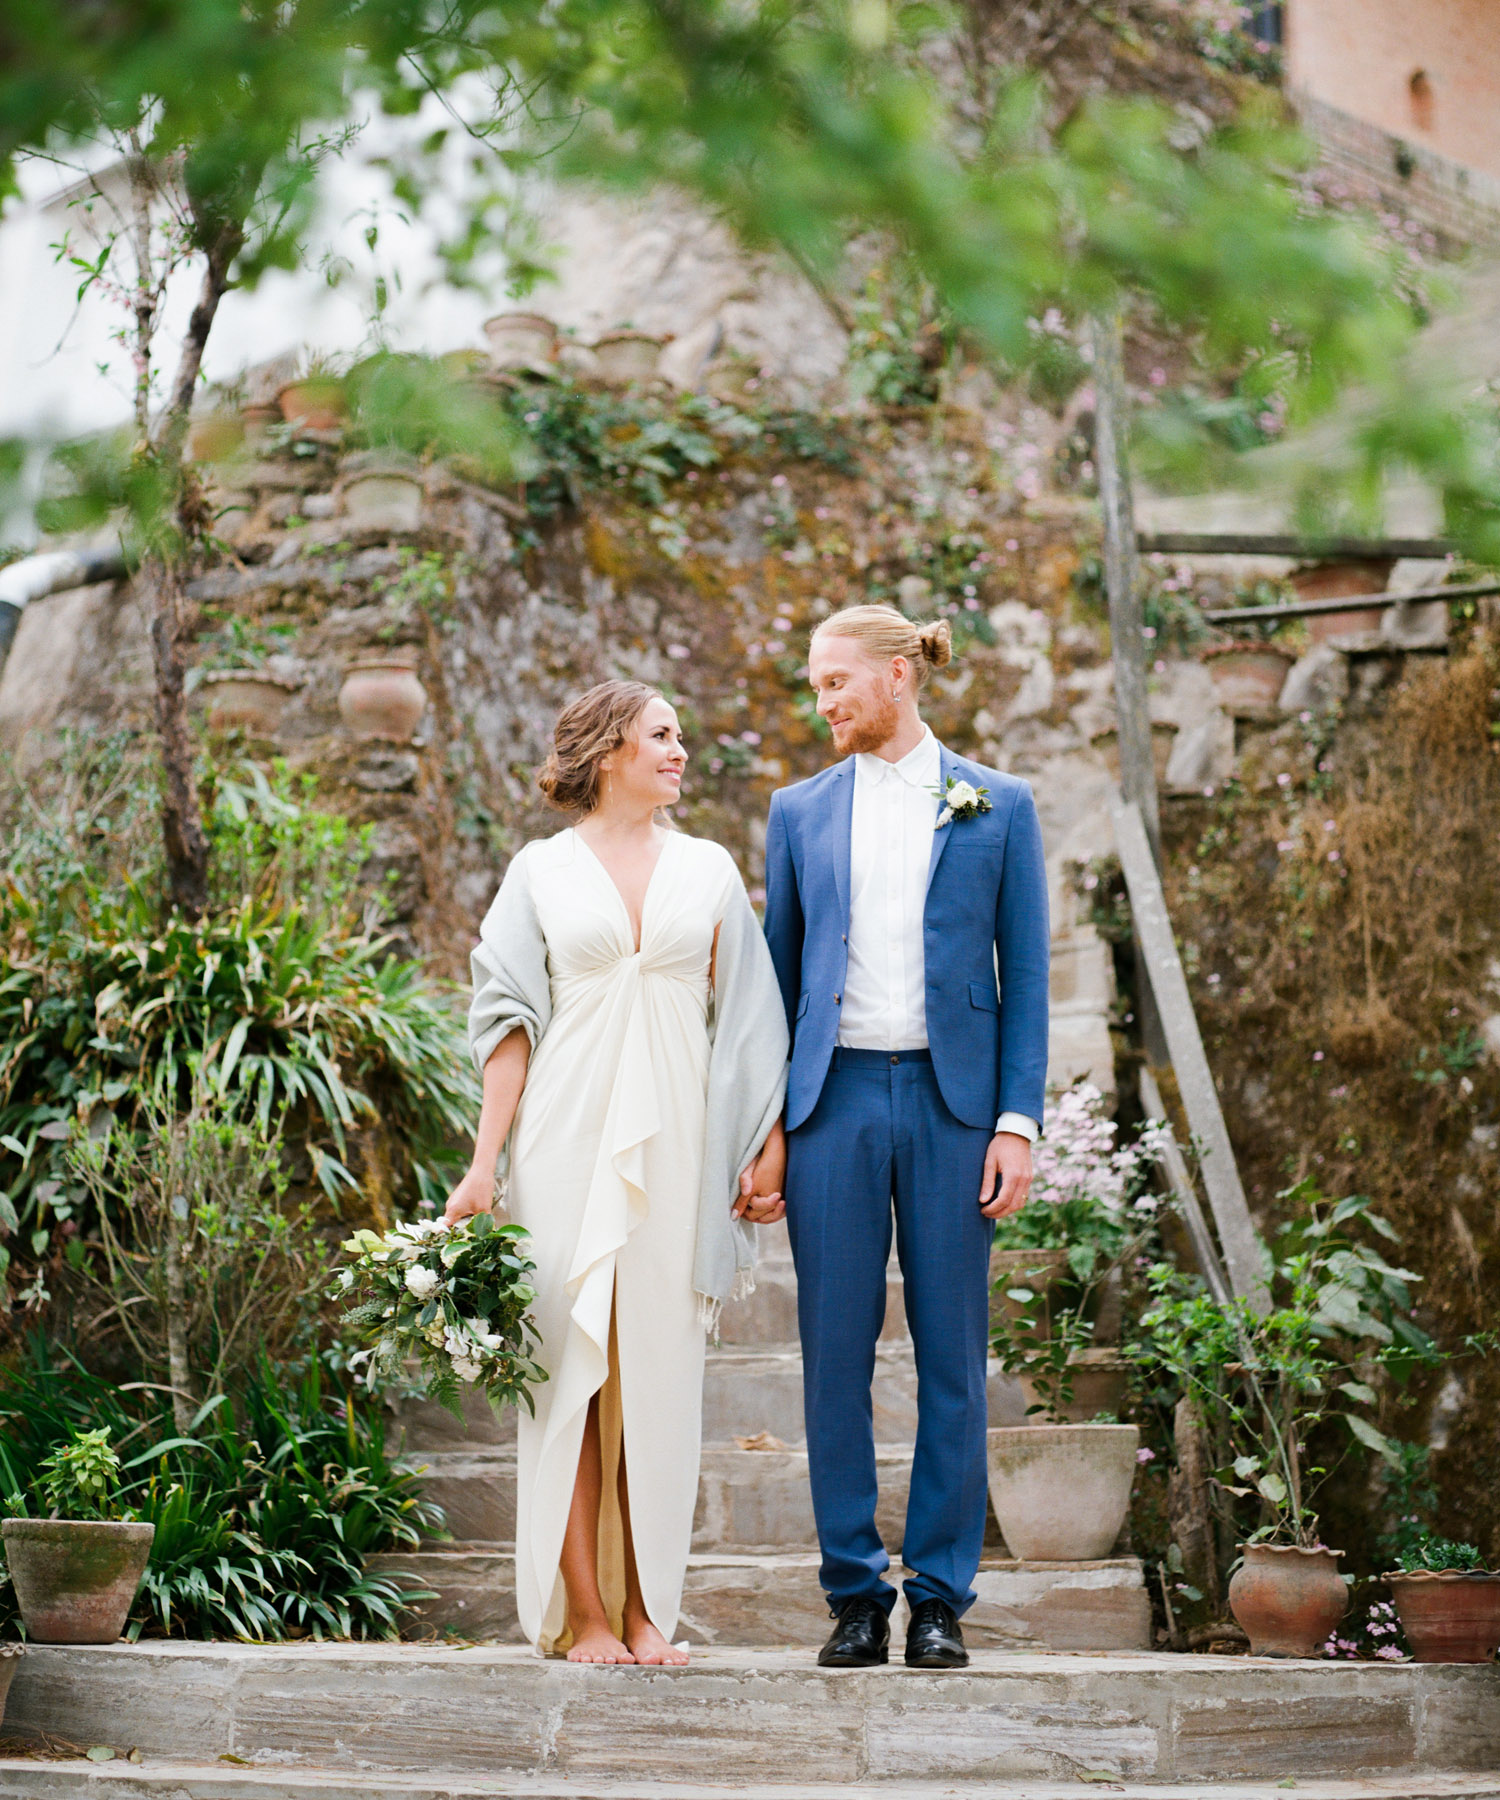 Nepal Wedding Photography with Shop Gossamer, Nina & Wes Photography, Silk and Willow & Brown Linen Design